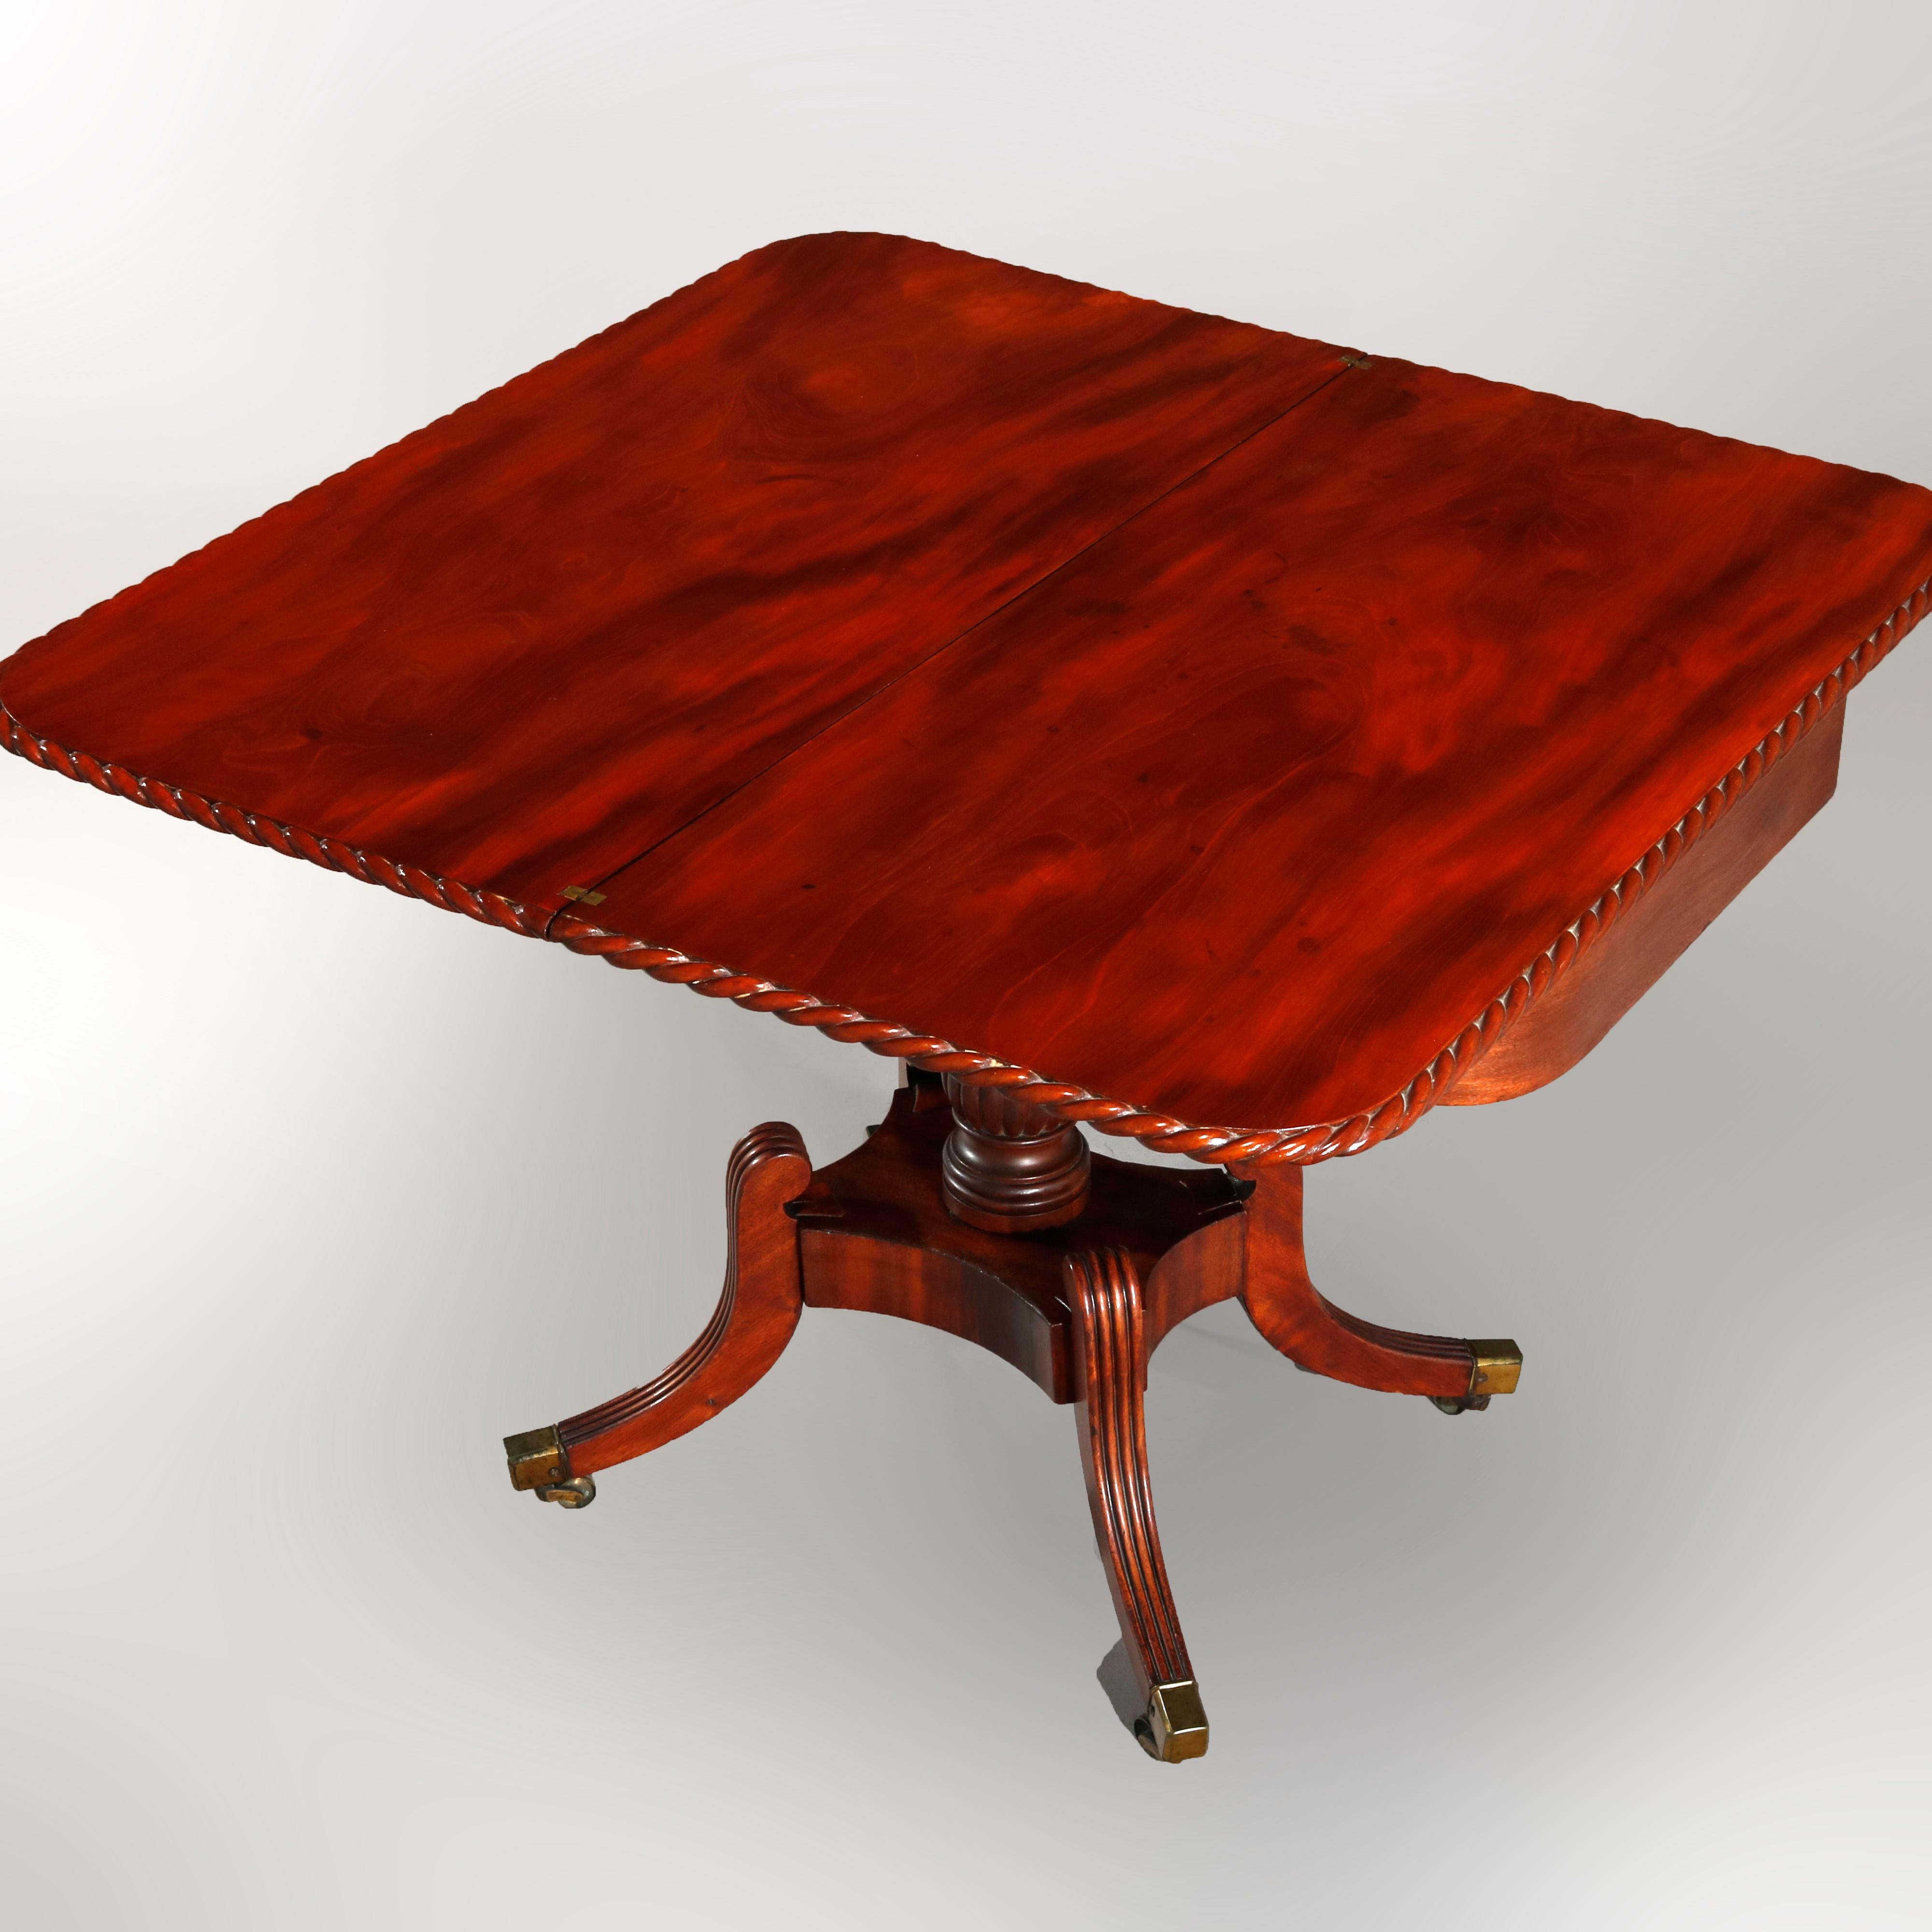 American Pair of Federal Flamed Mahogany Game Tables W. Gadrooned Edge, circa 1820